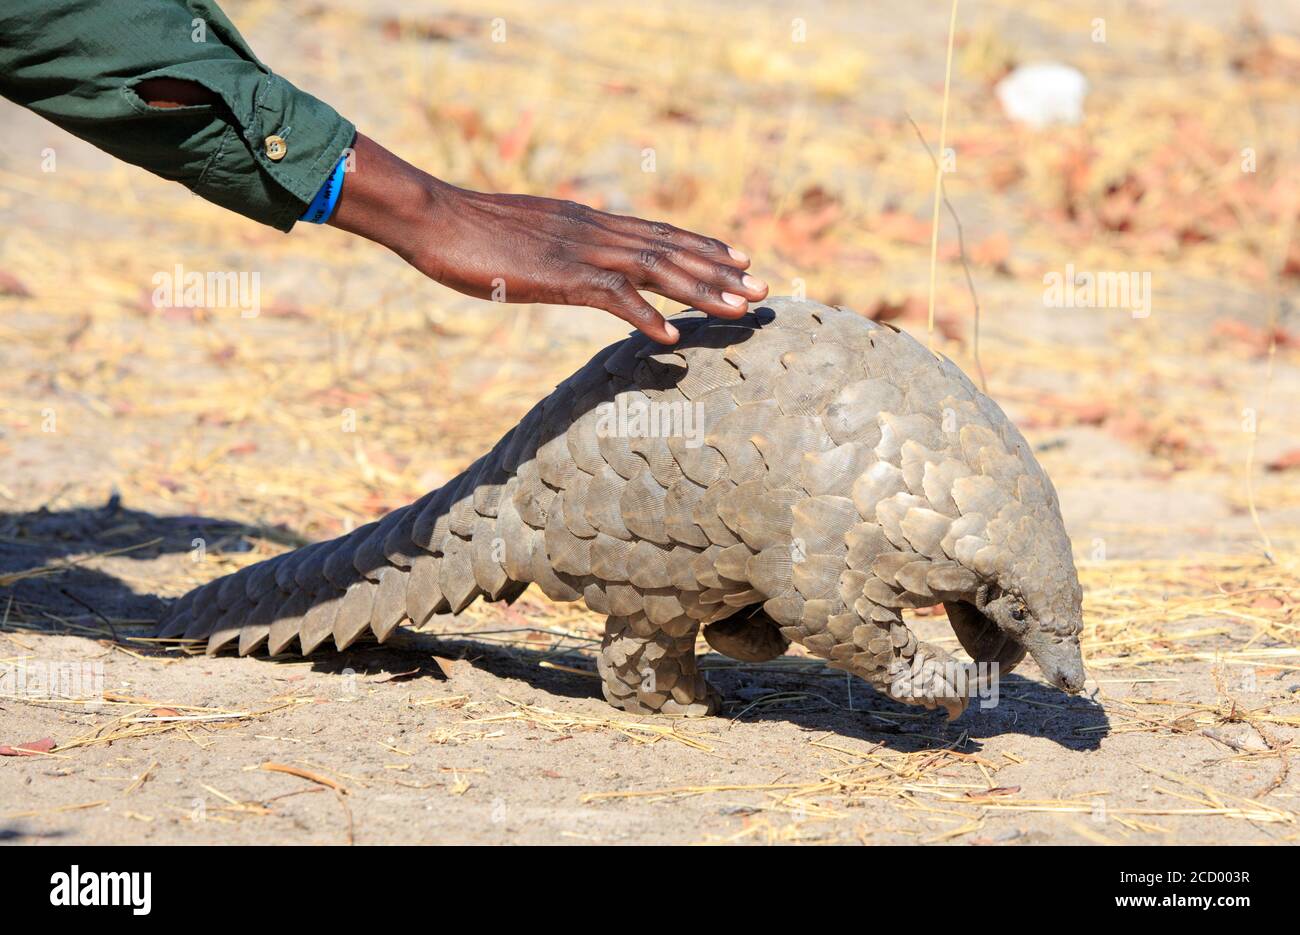 A critically endangered Pangolin is spotted by a very enthusiastic guide, who kneels on the Ground to touch it.  Hwange National Park, Zimbabwe Stock Photo